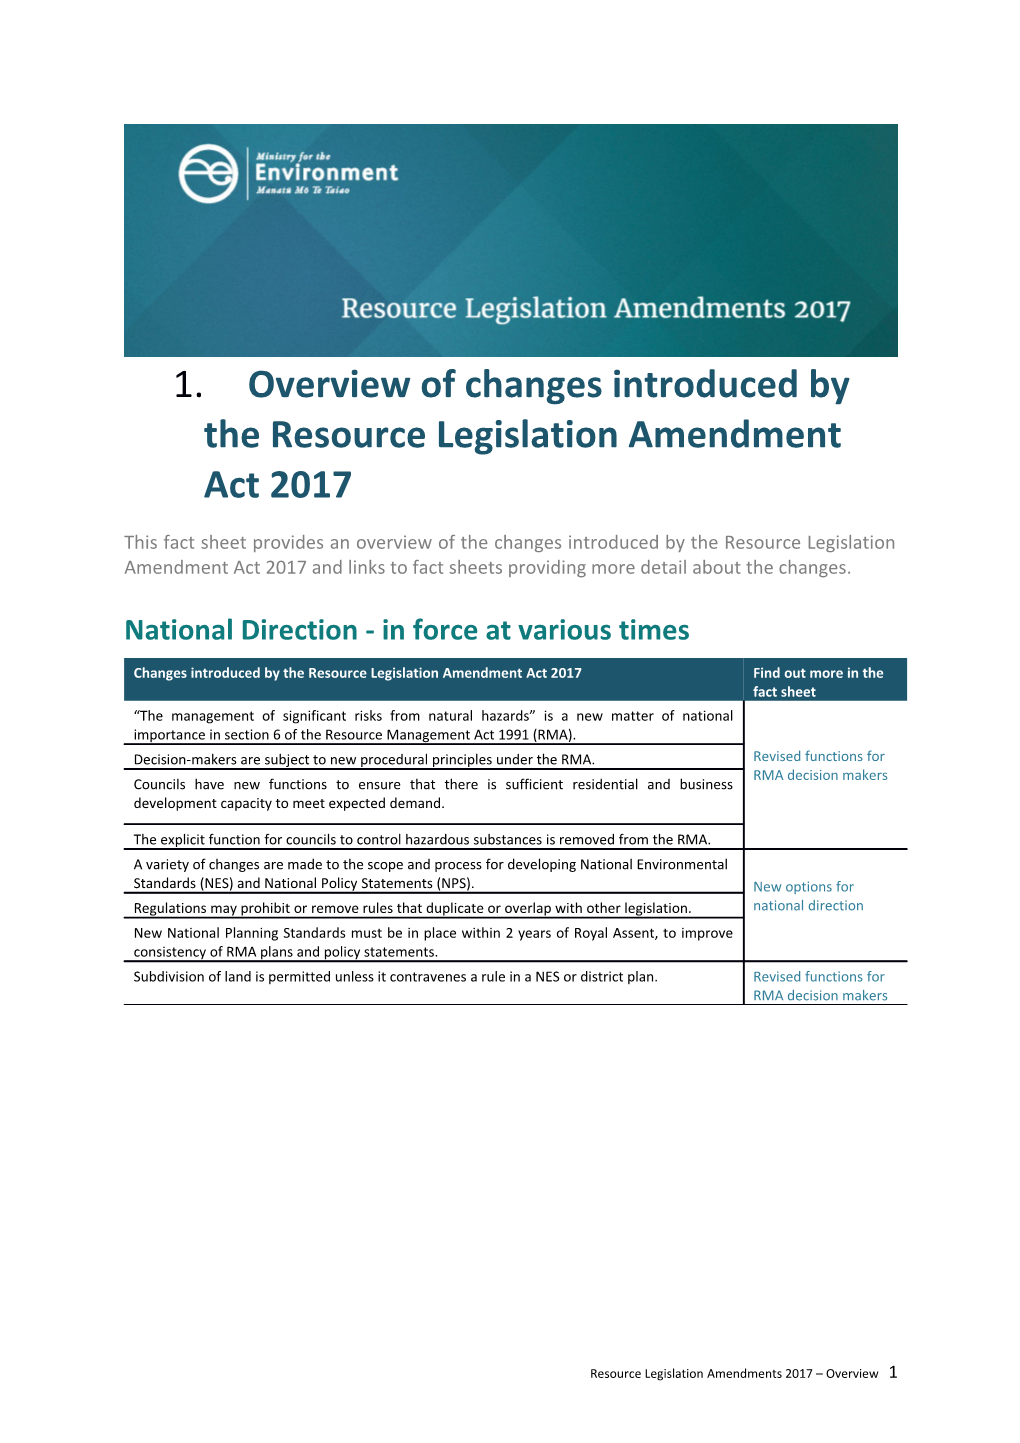 Overviewof Changes Introduced by the Resource Legislation Amendment Act 2017